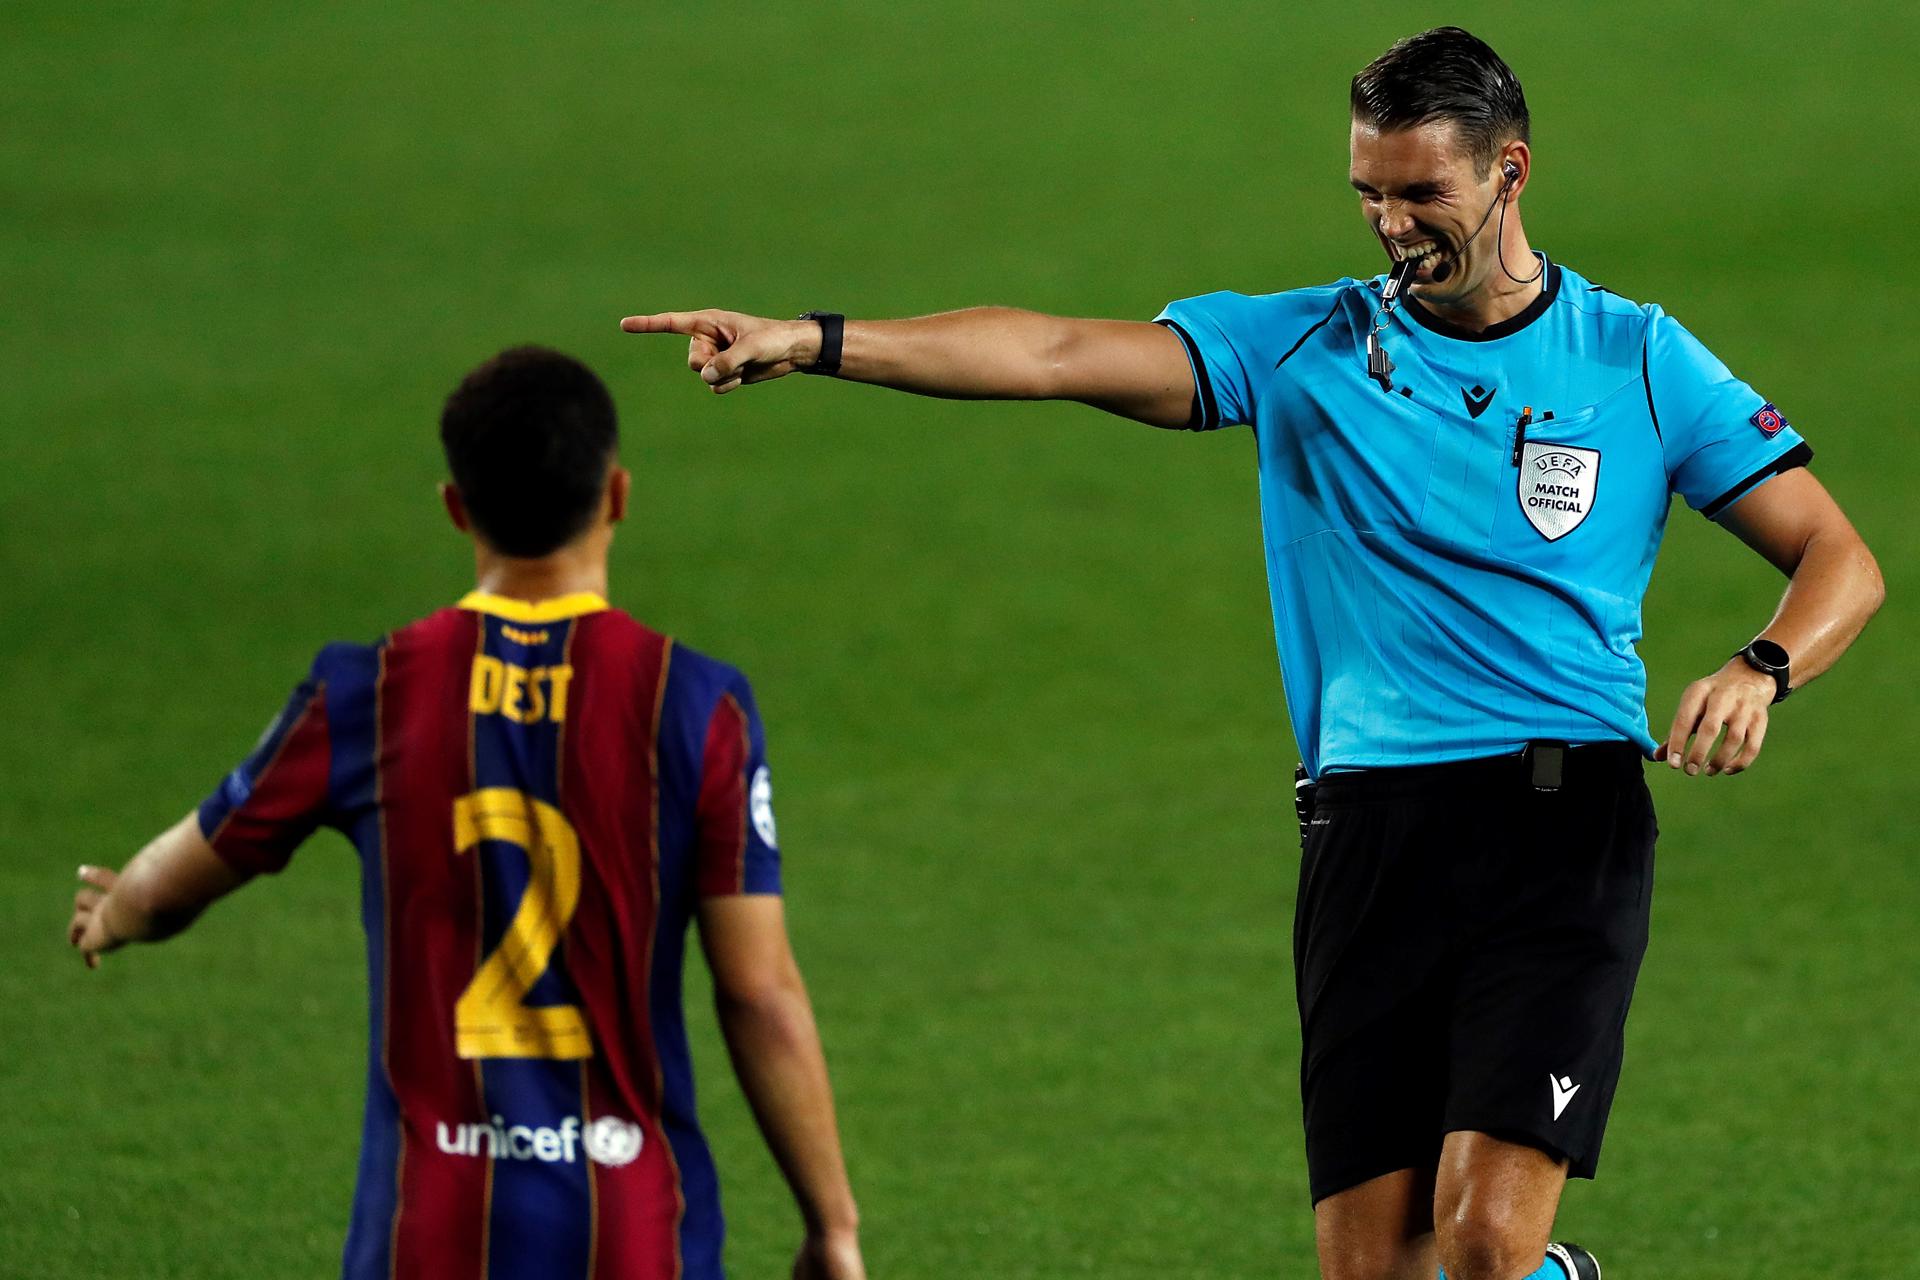 Scharer to referee the European Supercup